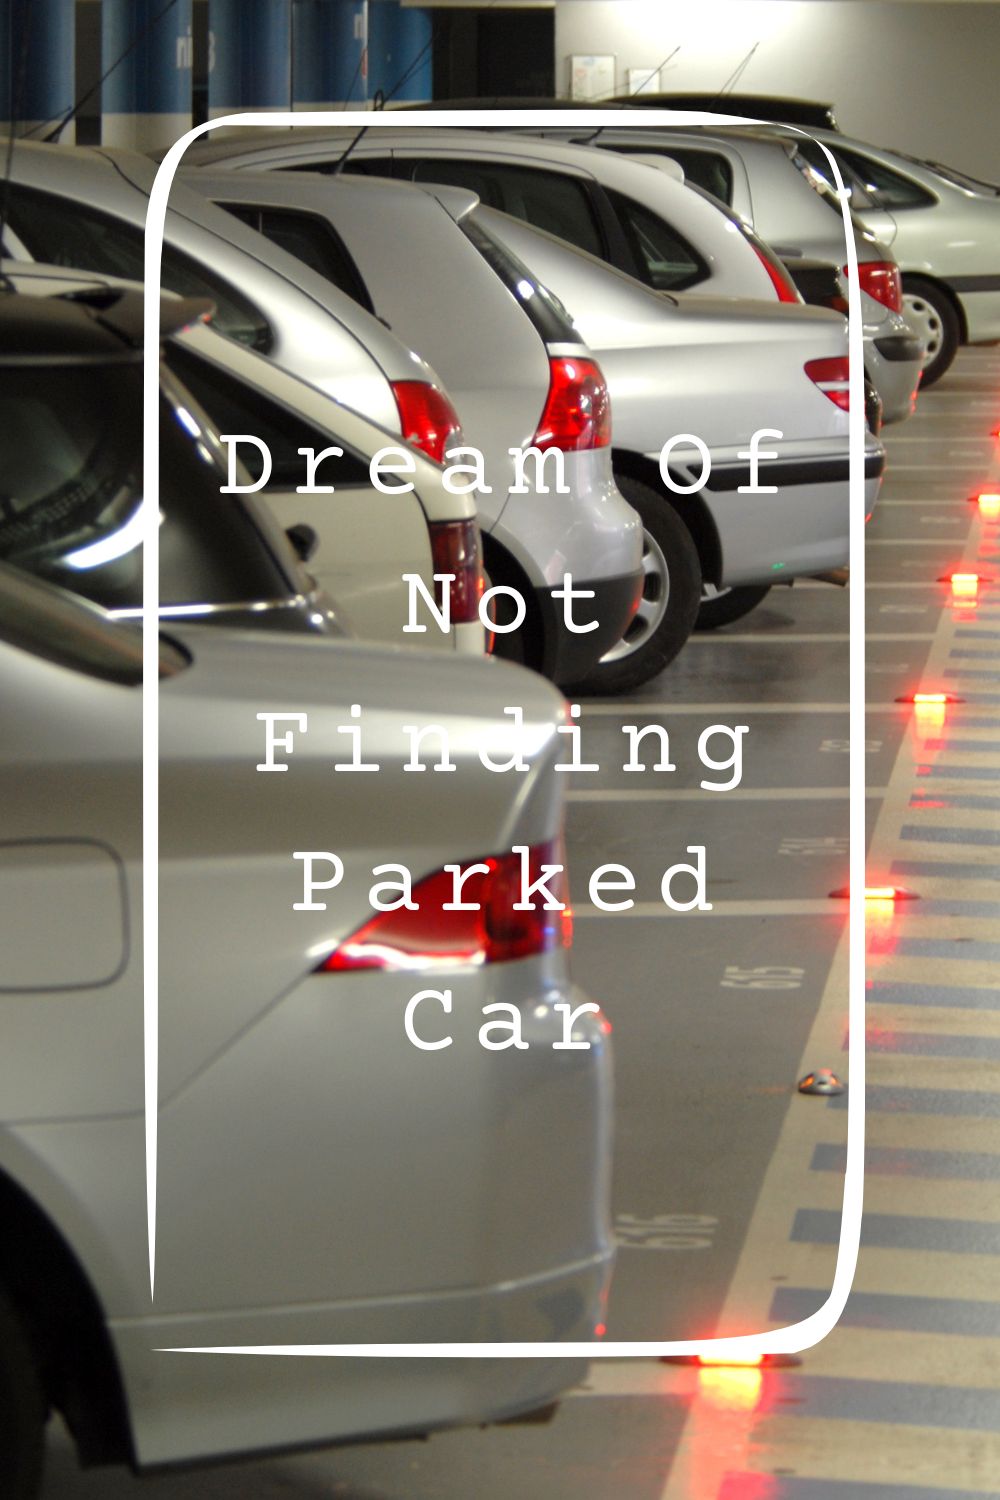 8 Dream Of Not Finding Parked Car Meanings1